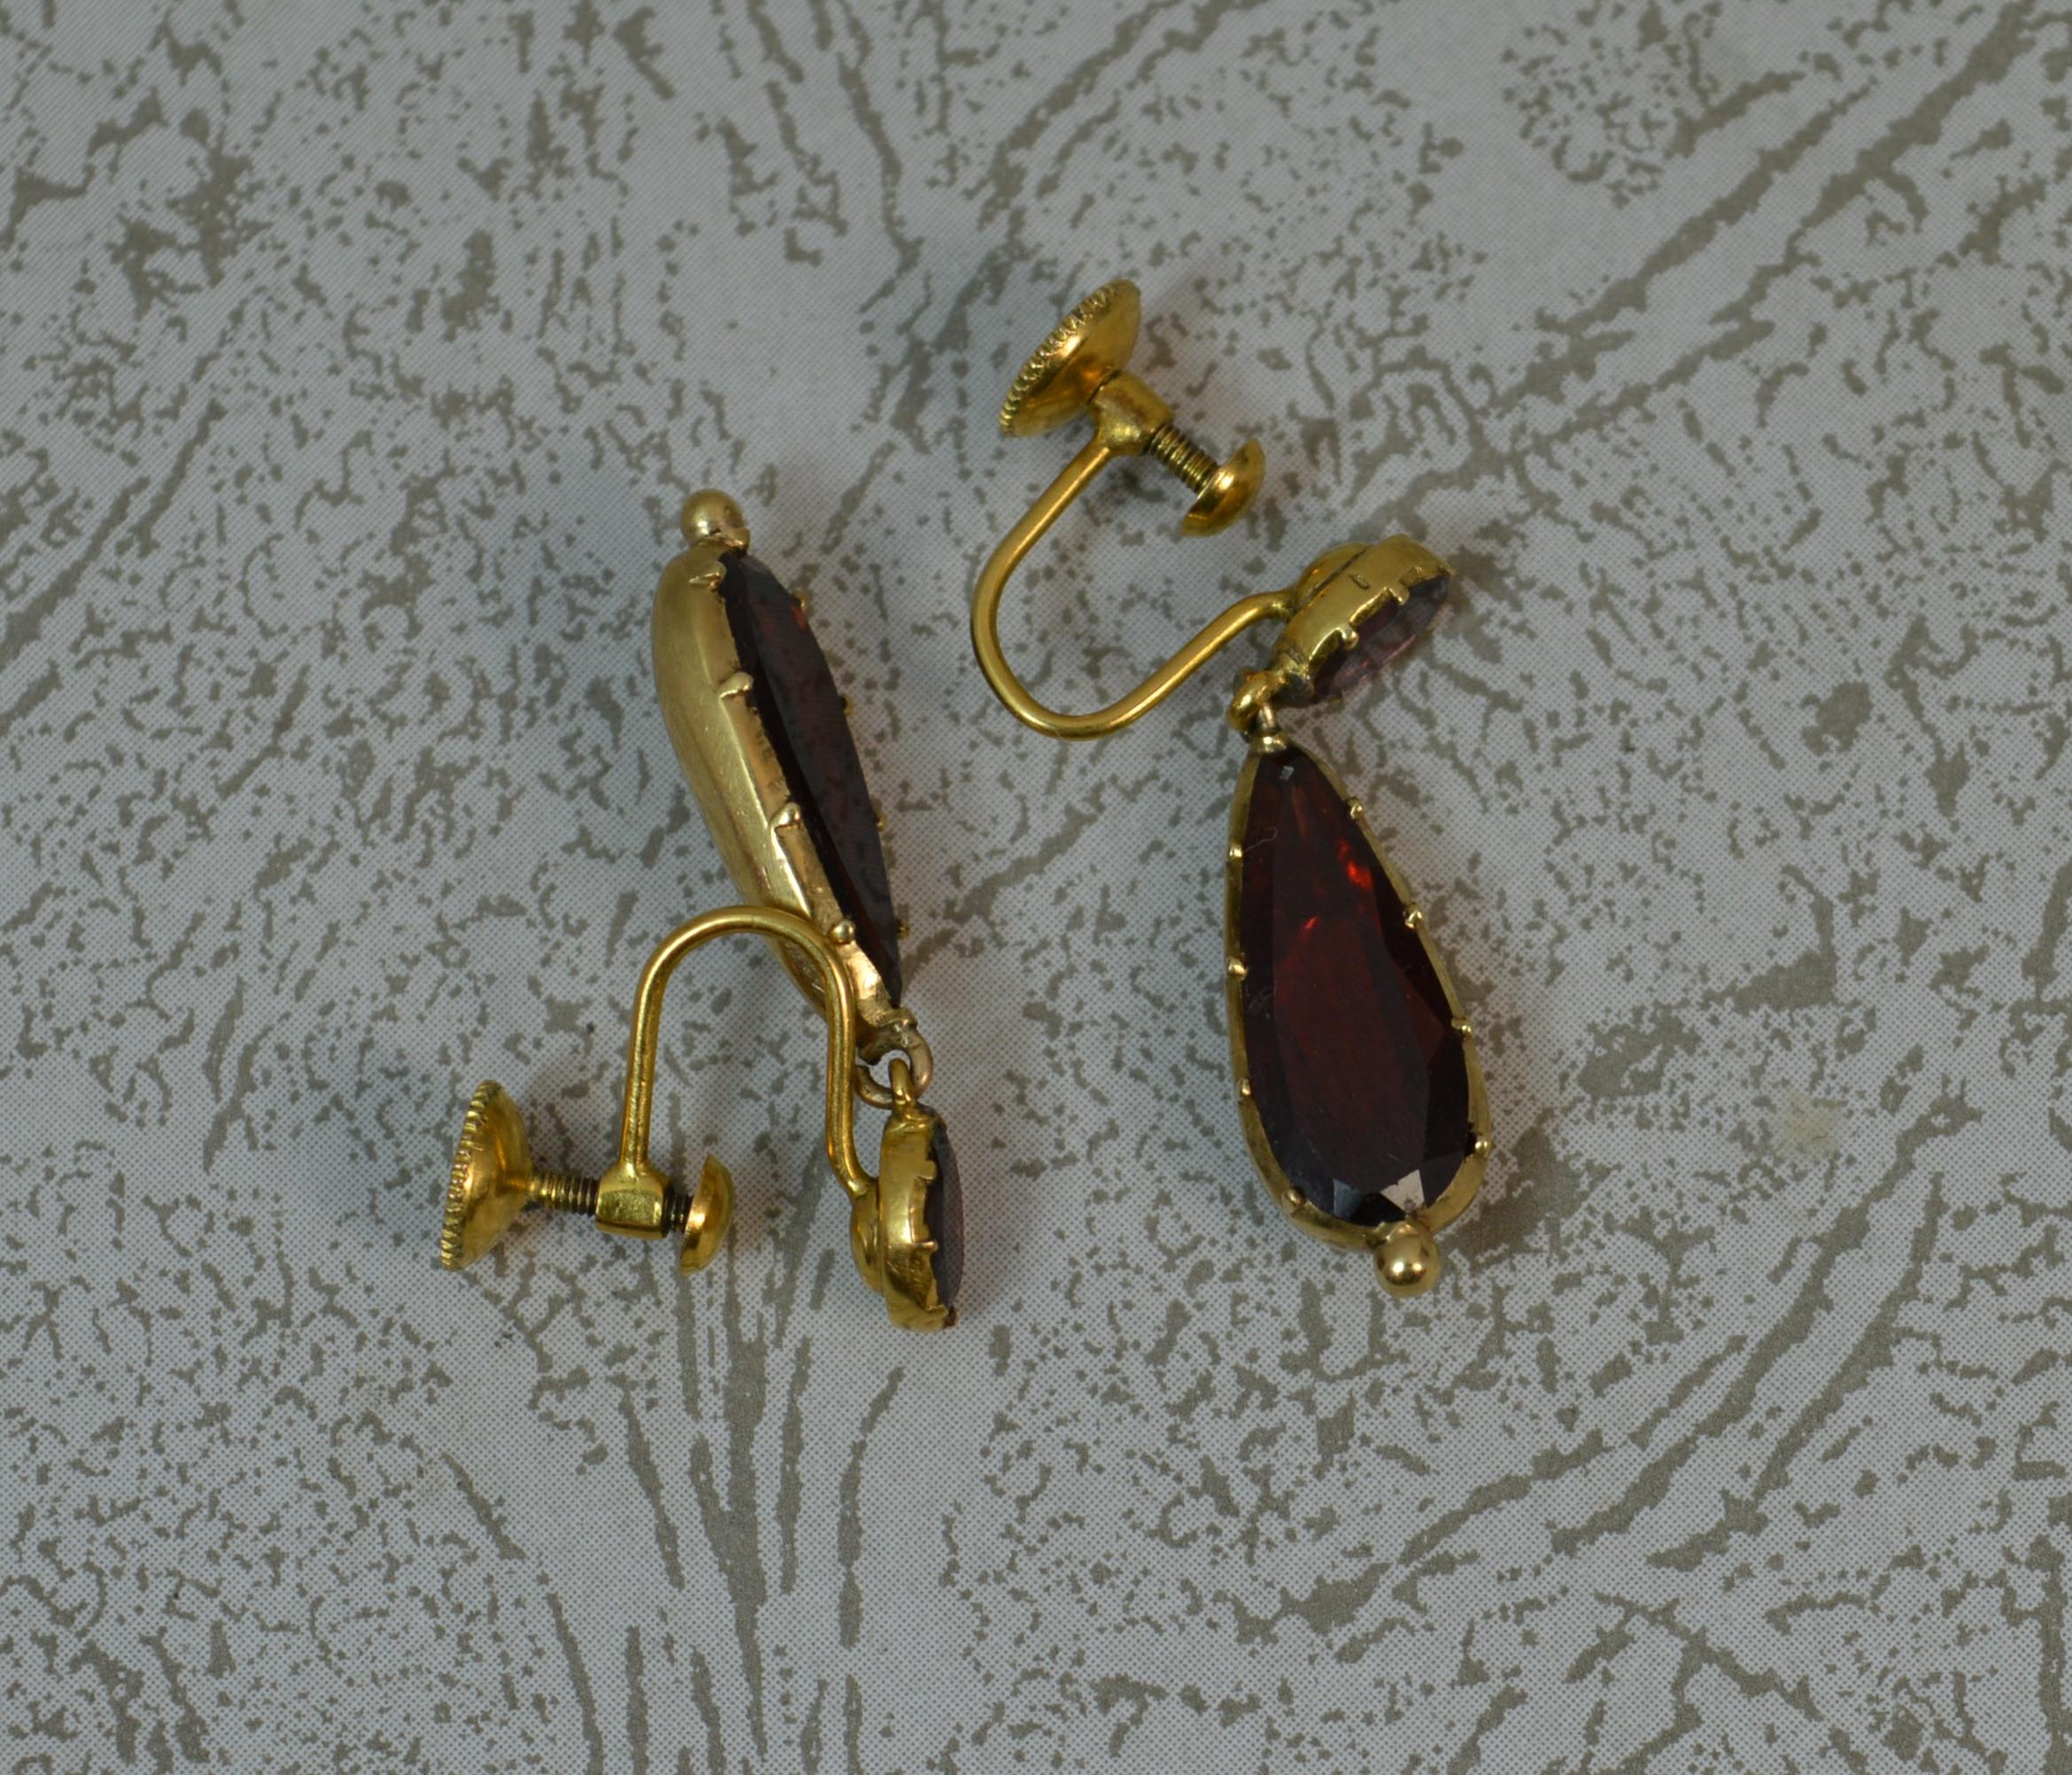 A superb pair of early Georgian period earrings. c1800.
Modelled with 18 carat yellow gold with closed foiled back settings.
Drop dangle torpedo like earrings. Each set with an oval garnet to top and elongated pair garnet below.
26mm total drop